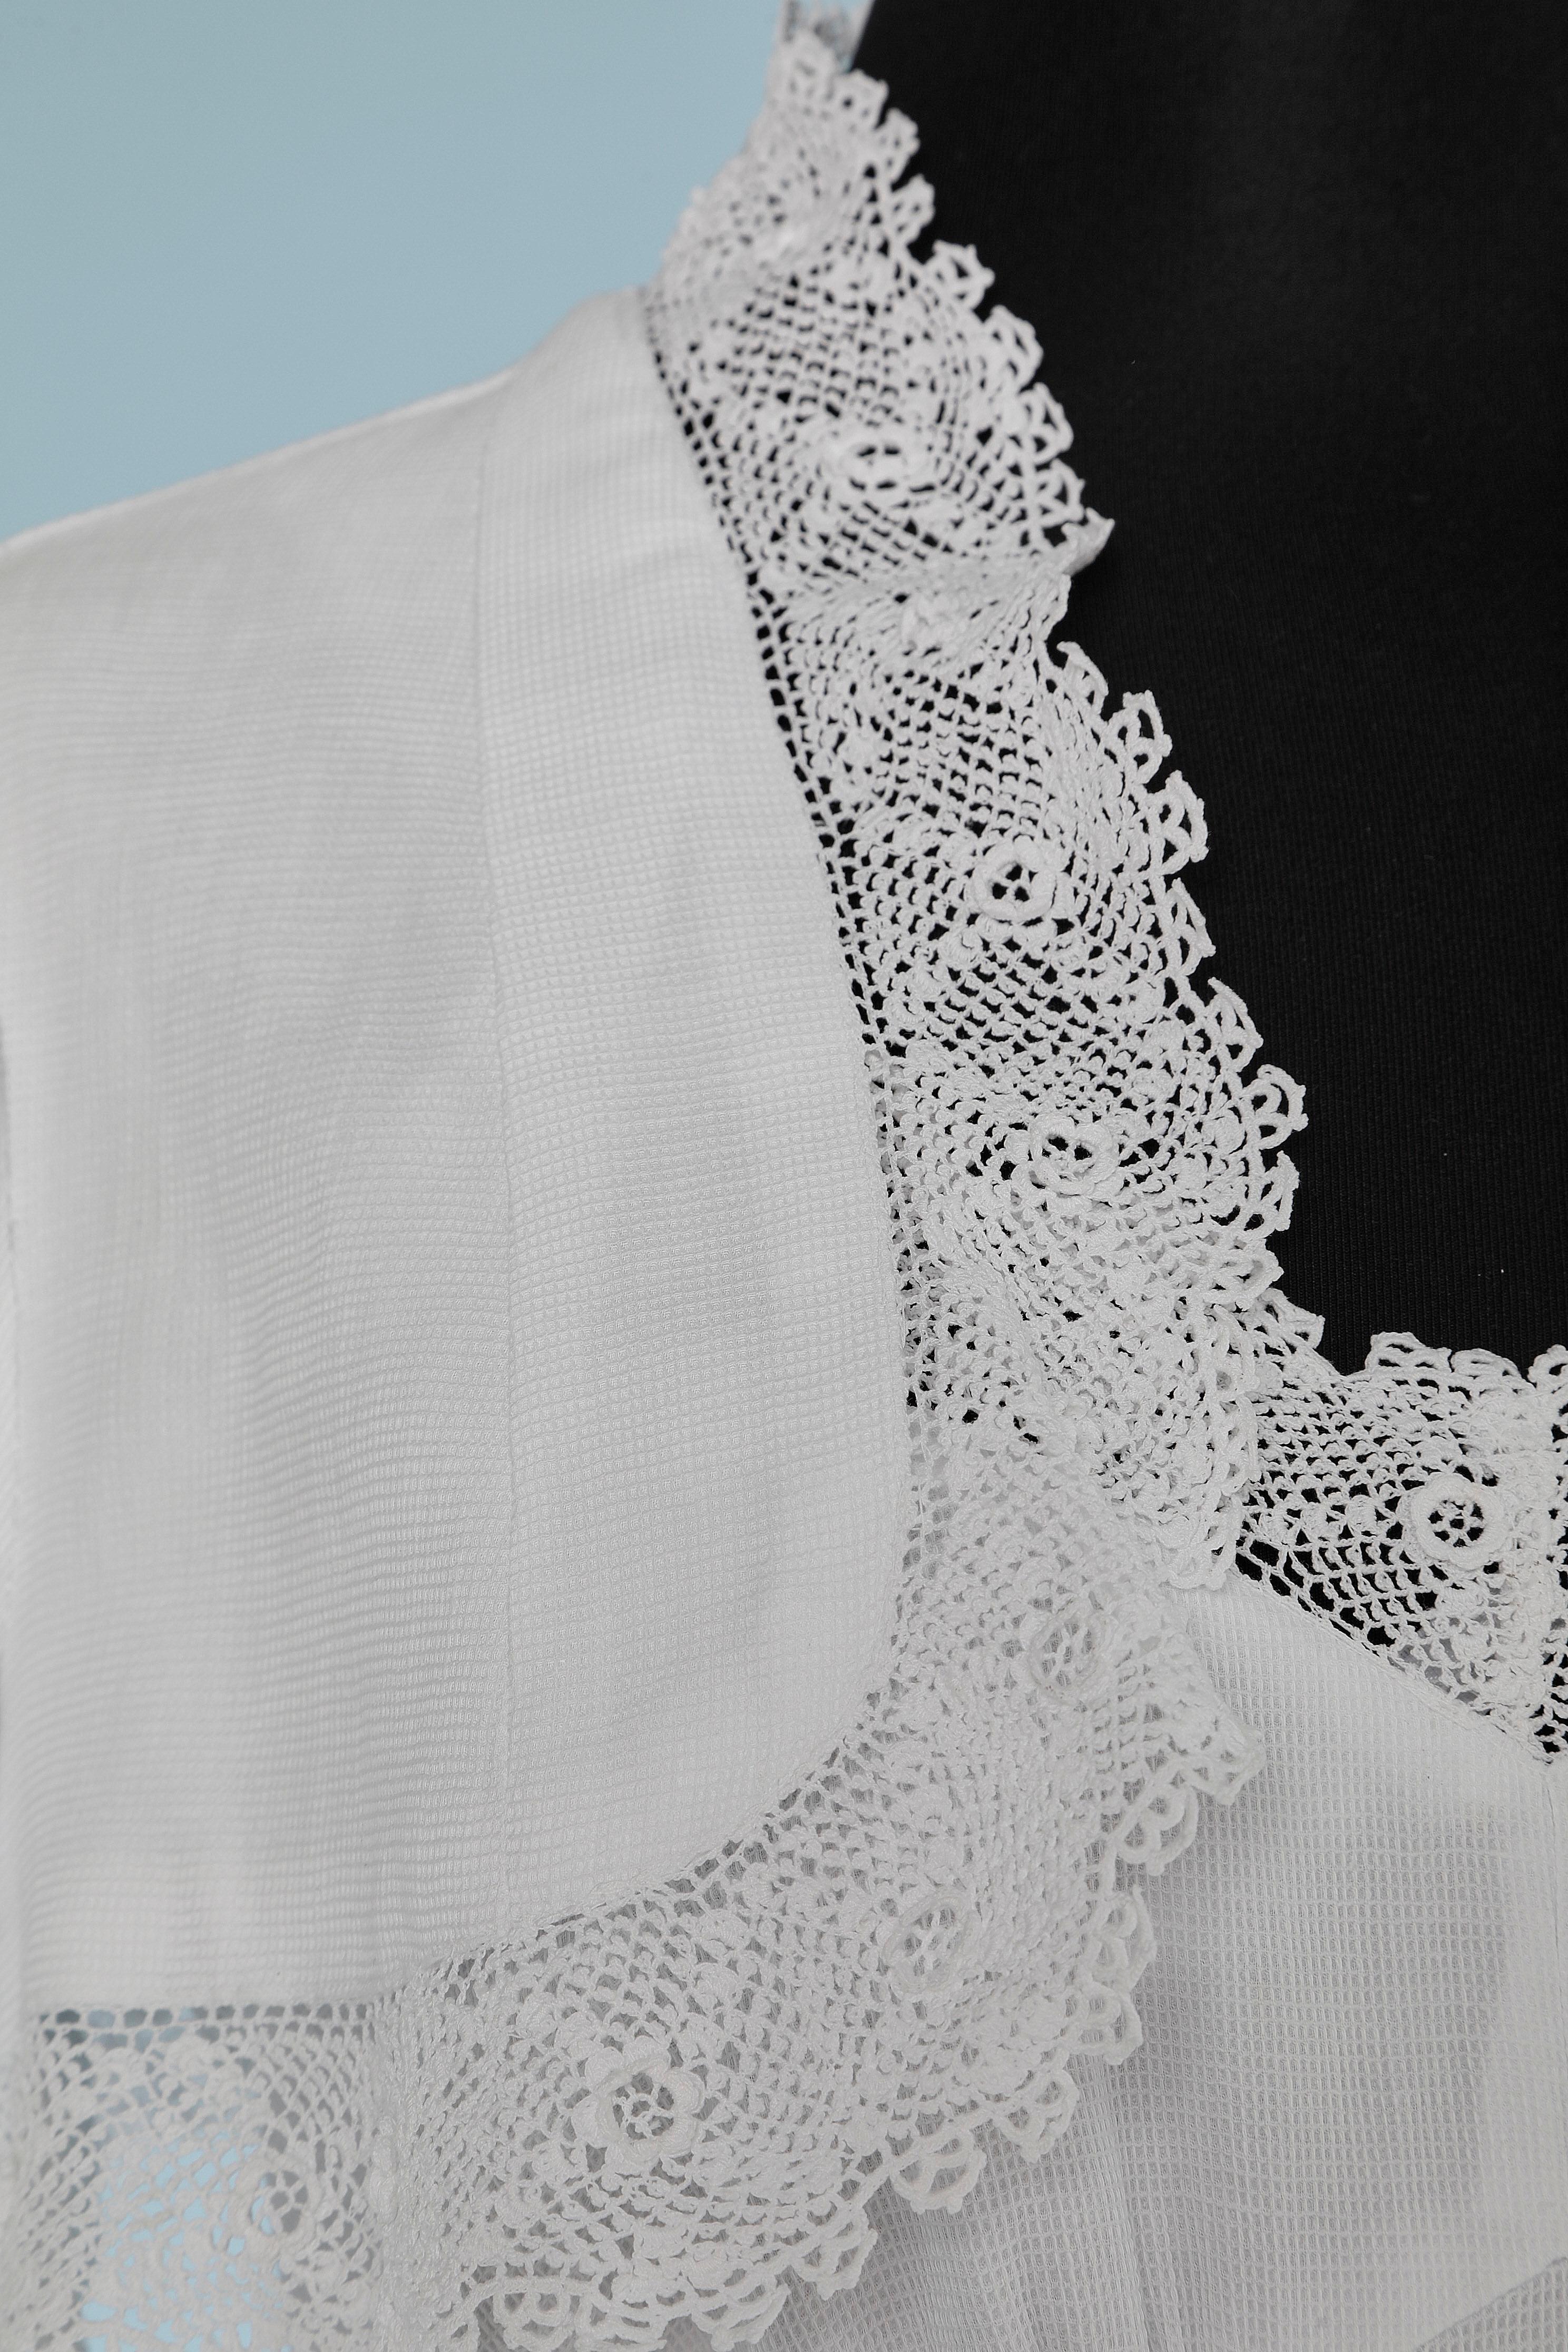 White cotton piqué wedding dress with lace ( Hand-made Irish crochet) edge and boléro.Zip in the middle back. SIZE M
